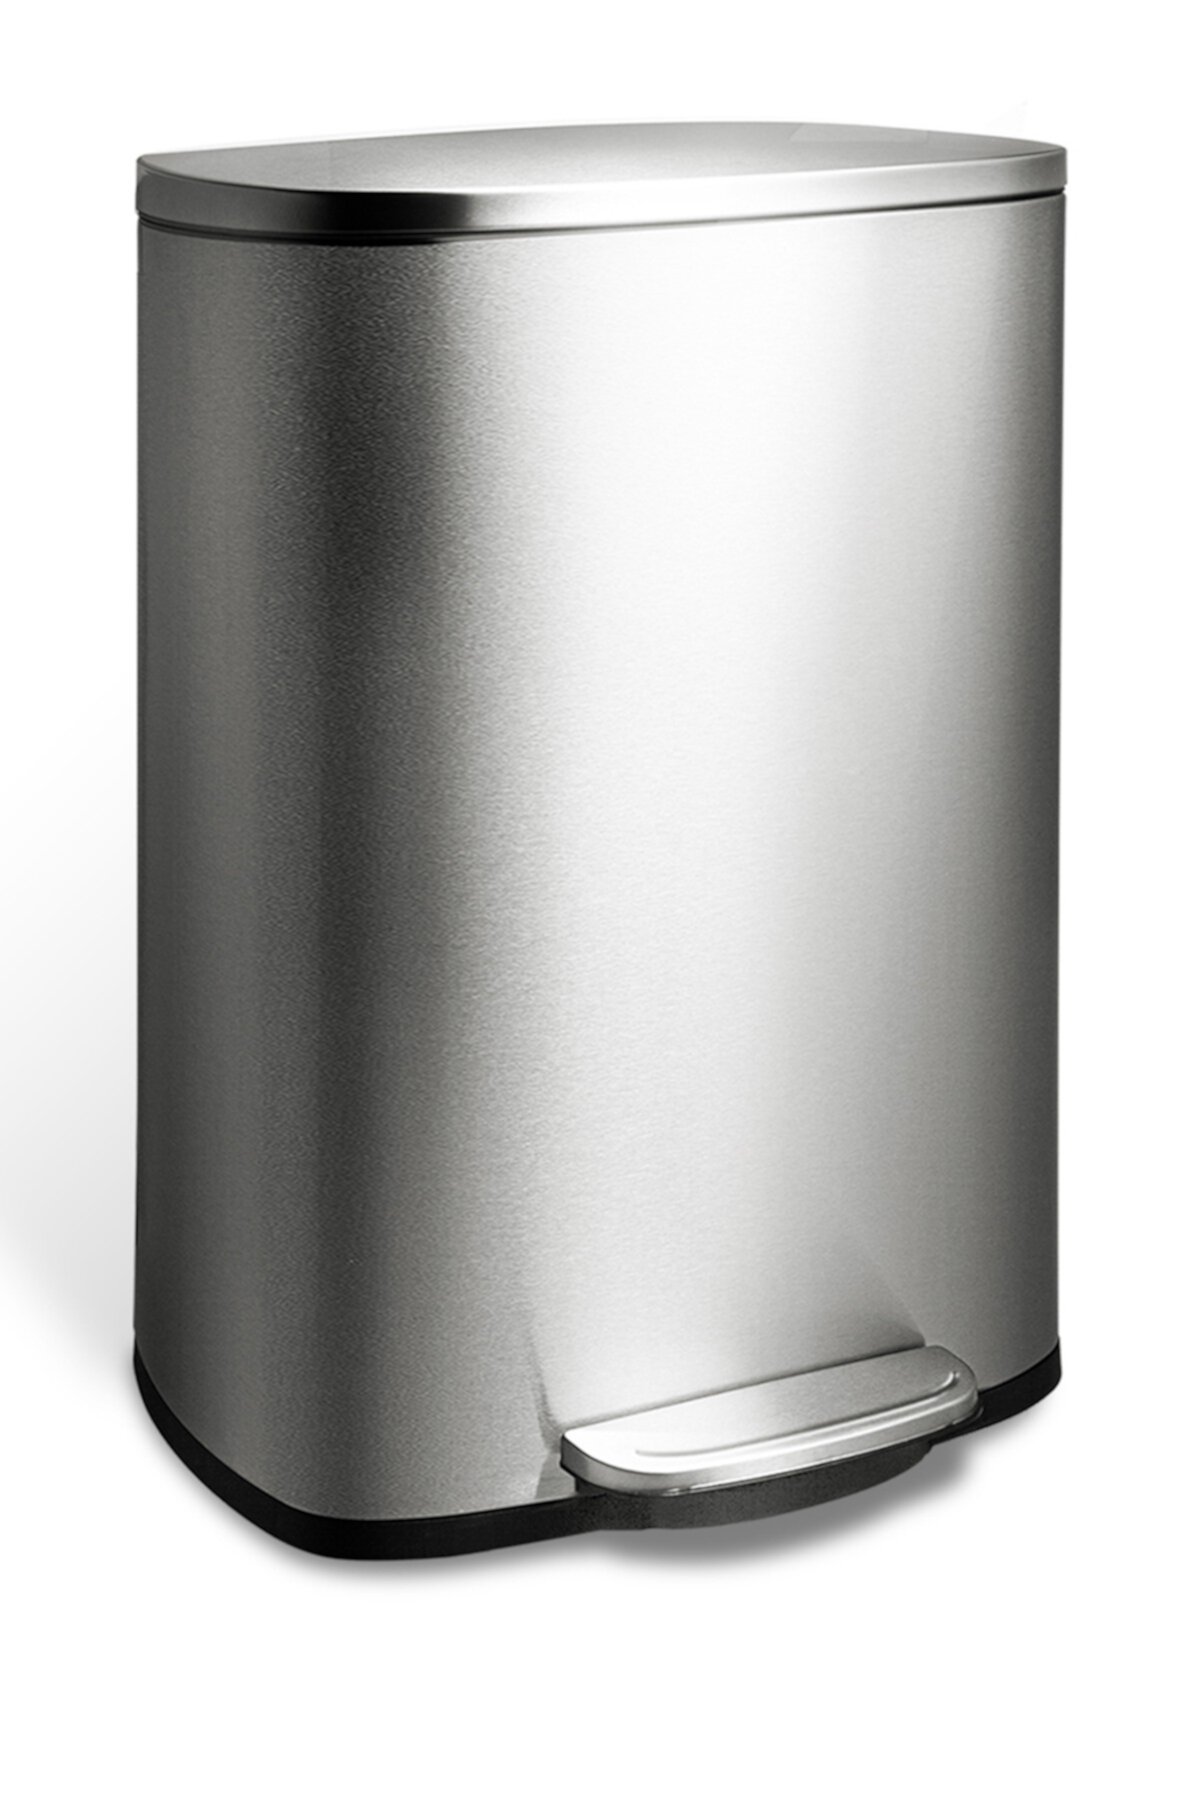 50L Stainless Steel Pedal Trash Can NINESTARS